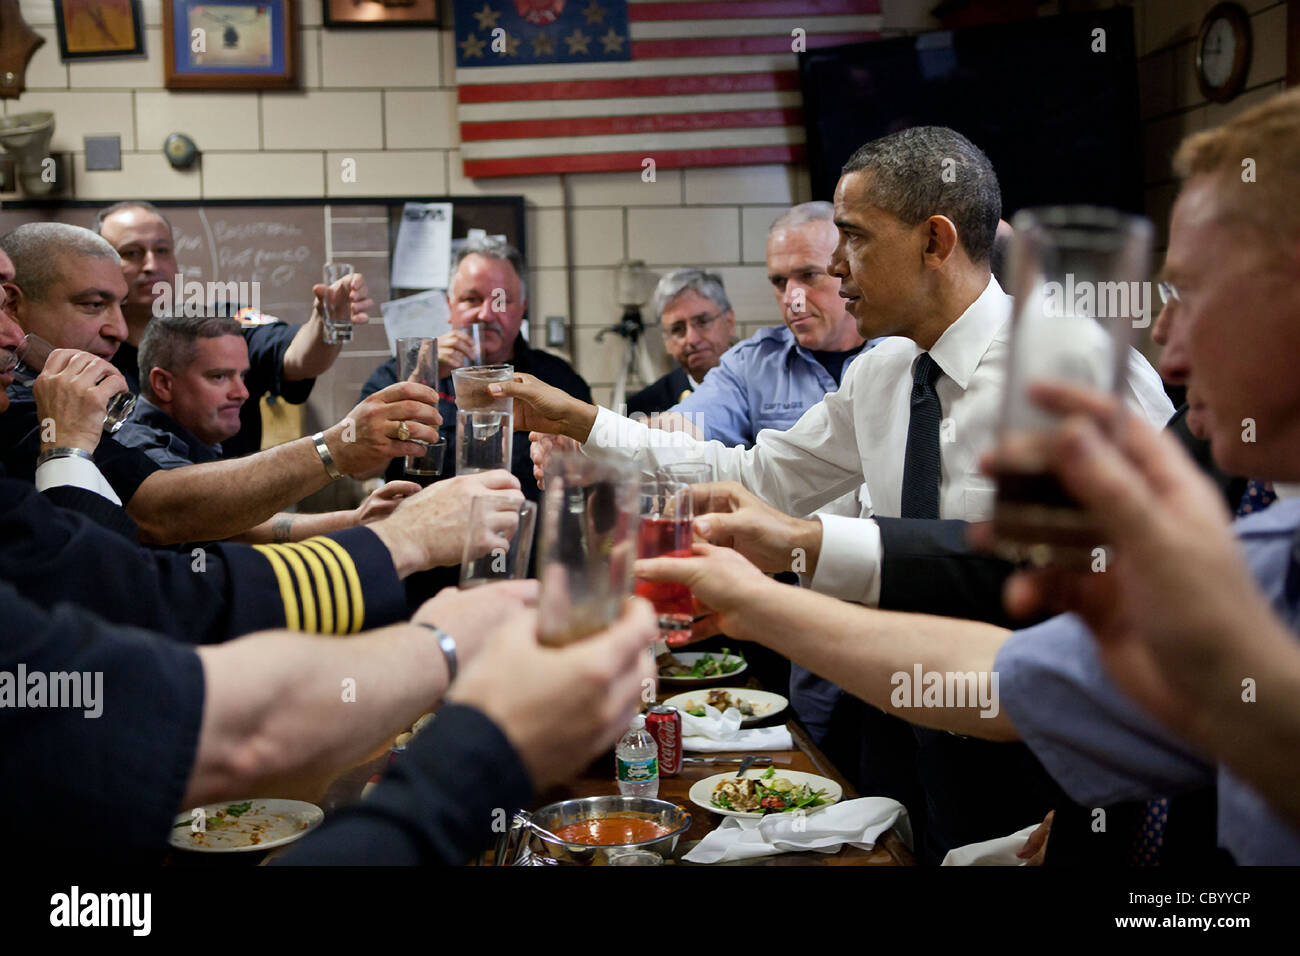 President Barack Obama toasts families of 9/11 victims and the fireman of Battalion 9 May 5, 2011 in New York City, NY. The visit was to mark the death of Osama bin Laden killed 4 days earlier by US Special Forces. Stock Photo